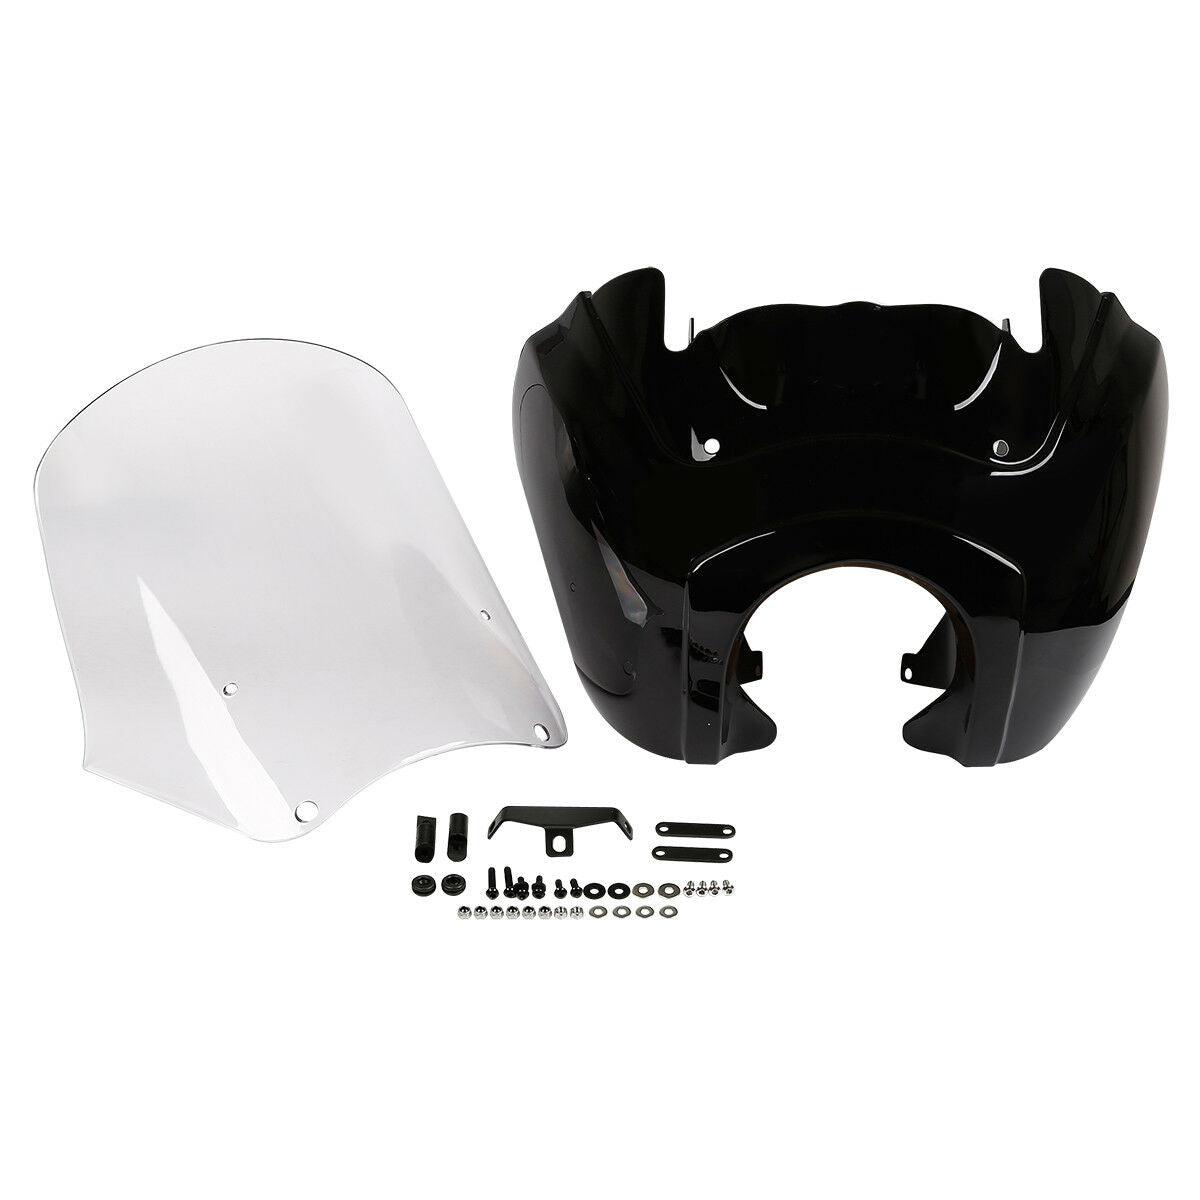 Front Upper Fairing w/ 15" Windshield For Harley Dyna Street Bob FXDB 2006-2017 - Moto Life Products